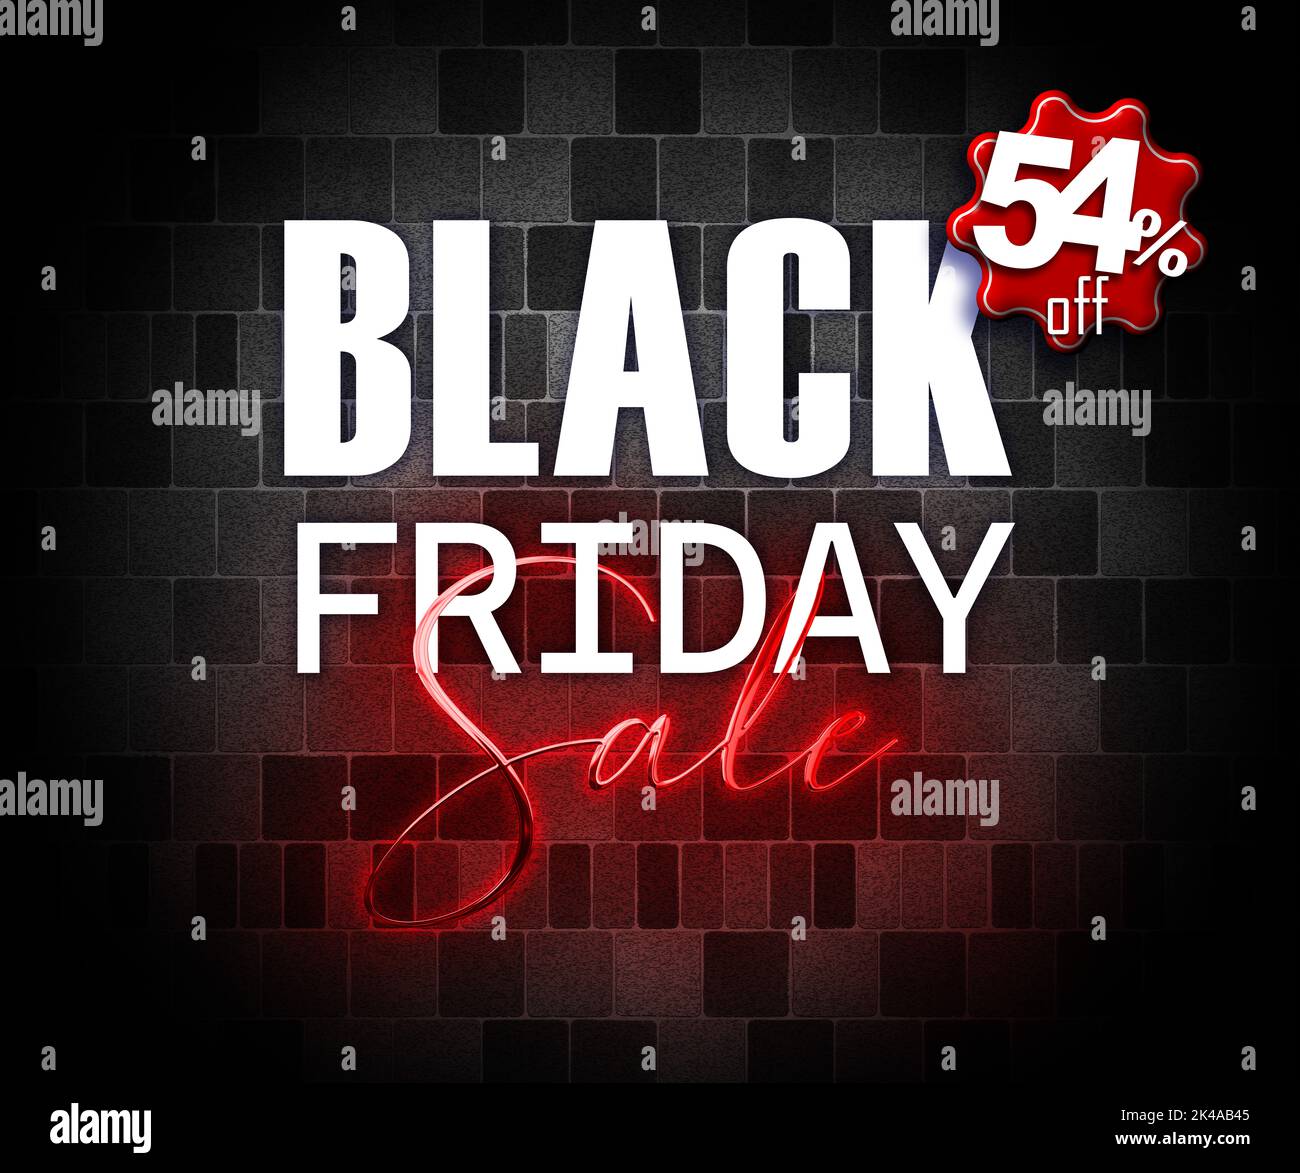 illustration with 3d elements black friday promotion banner 54 percent off sales increase Stock Photo